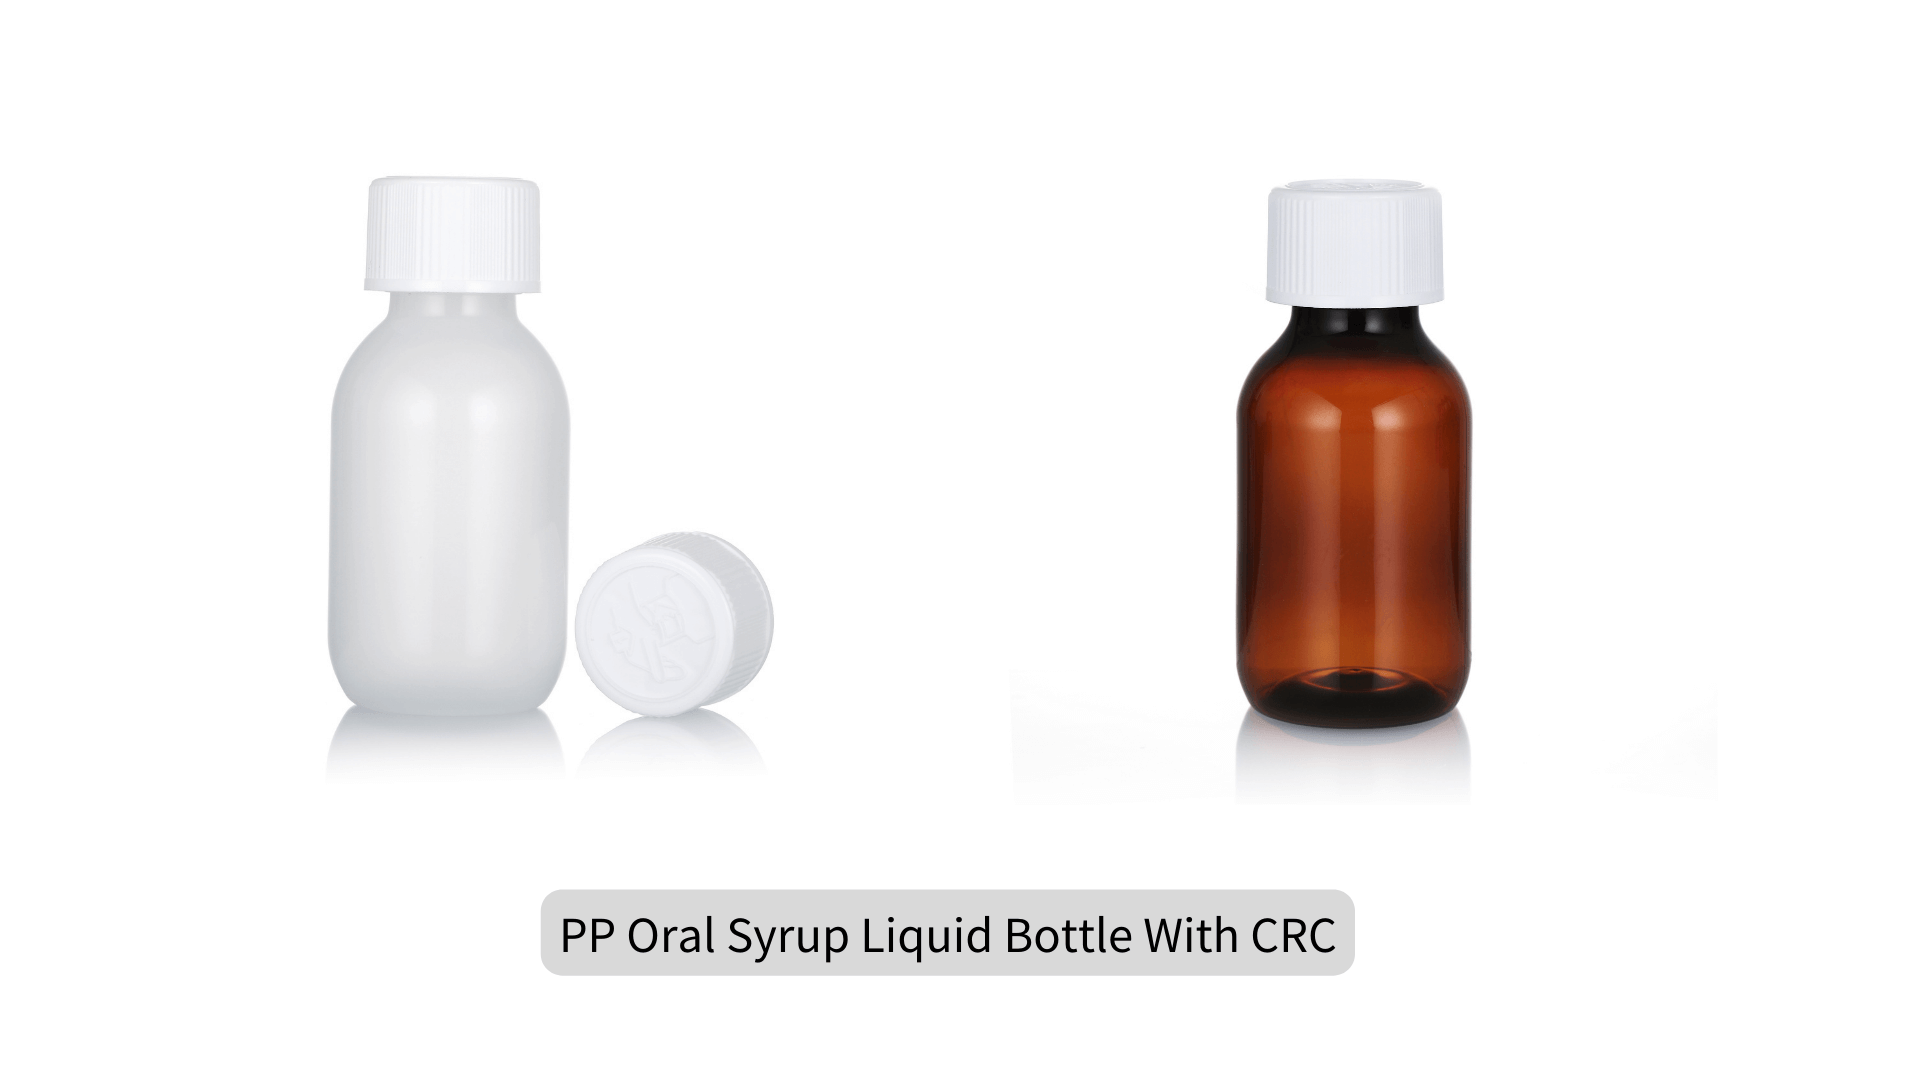 pp oral syrup liquid bottle with crc